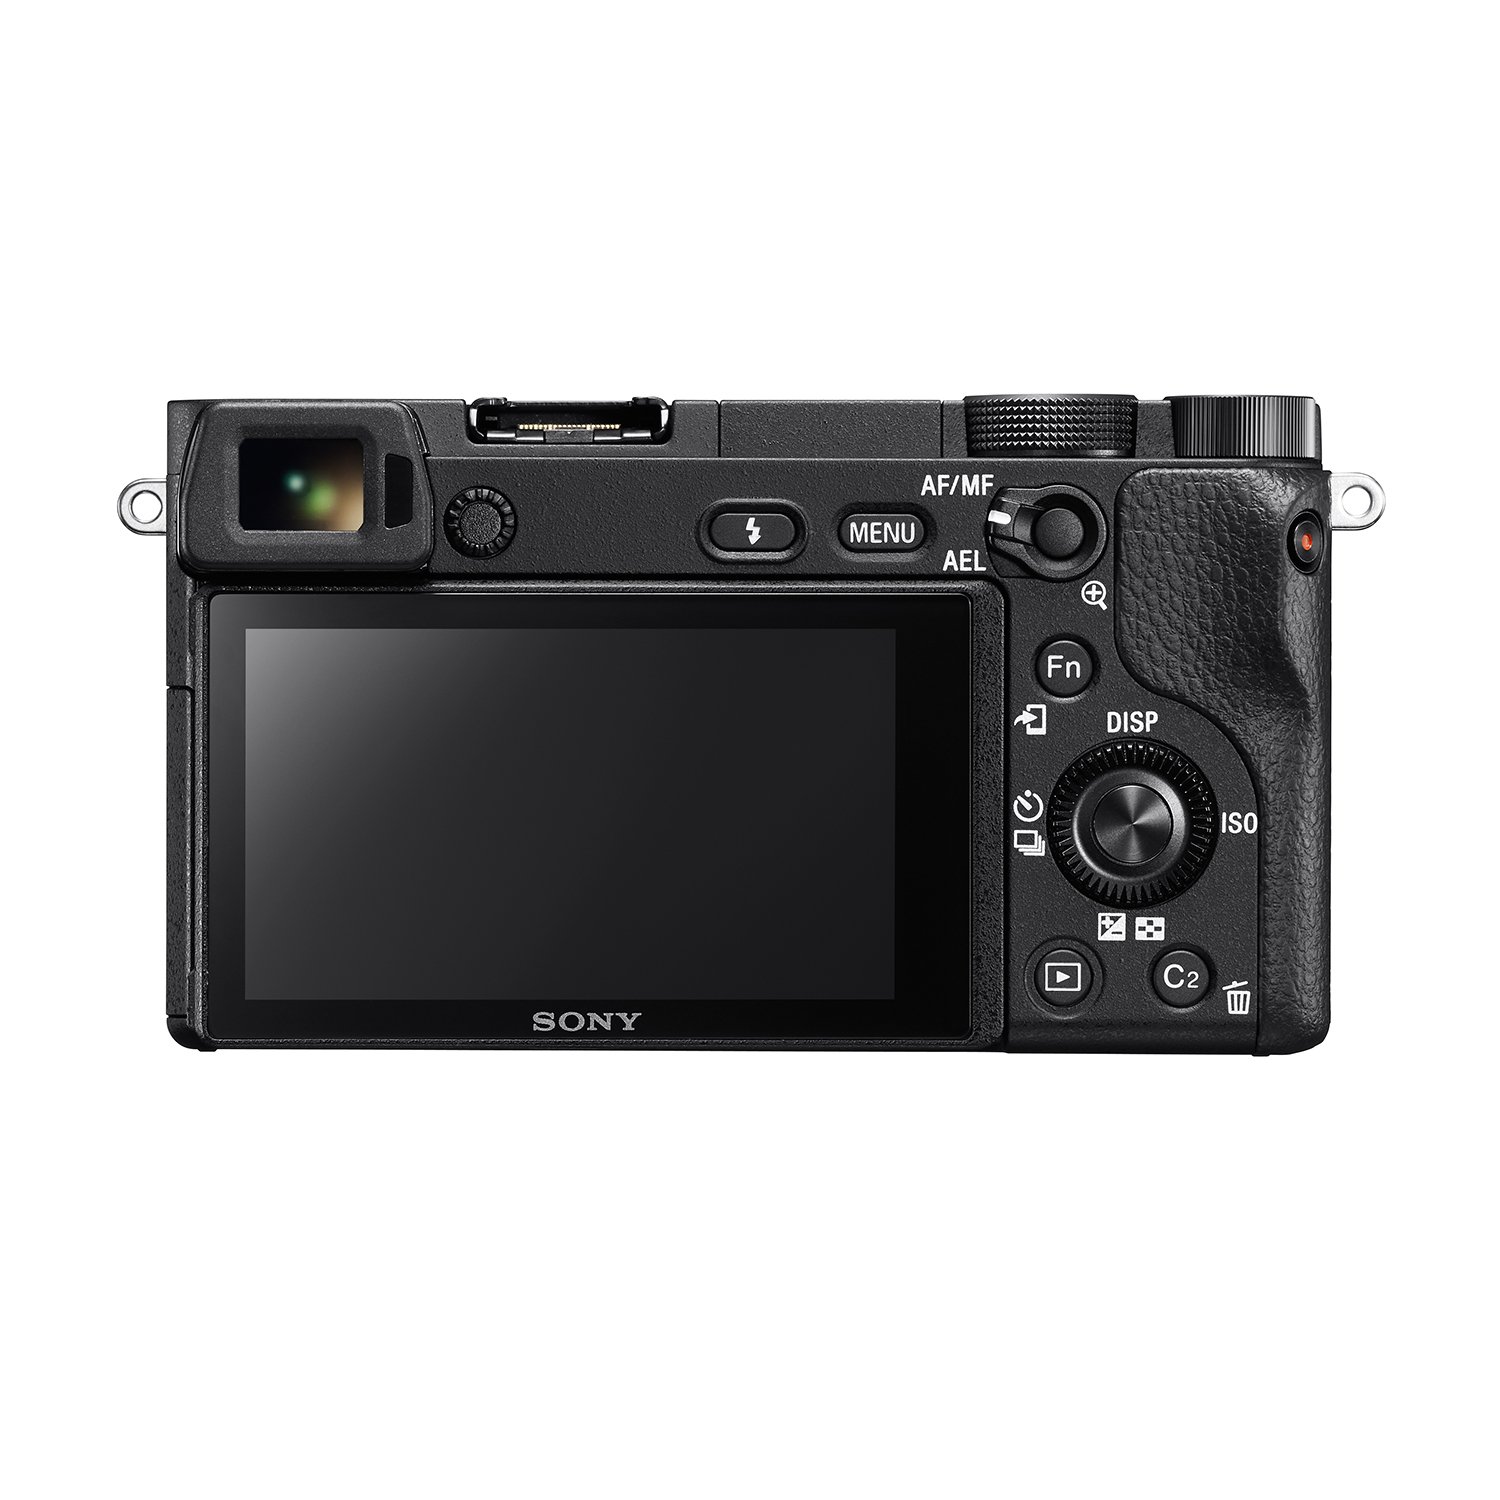 Sony Alpha a6300 ILCE6300M/B 24.2 MP Mirrorless Digital Camera with F3.5-5.6 OSS Zoom Lens, E 18-135mm, Black